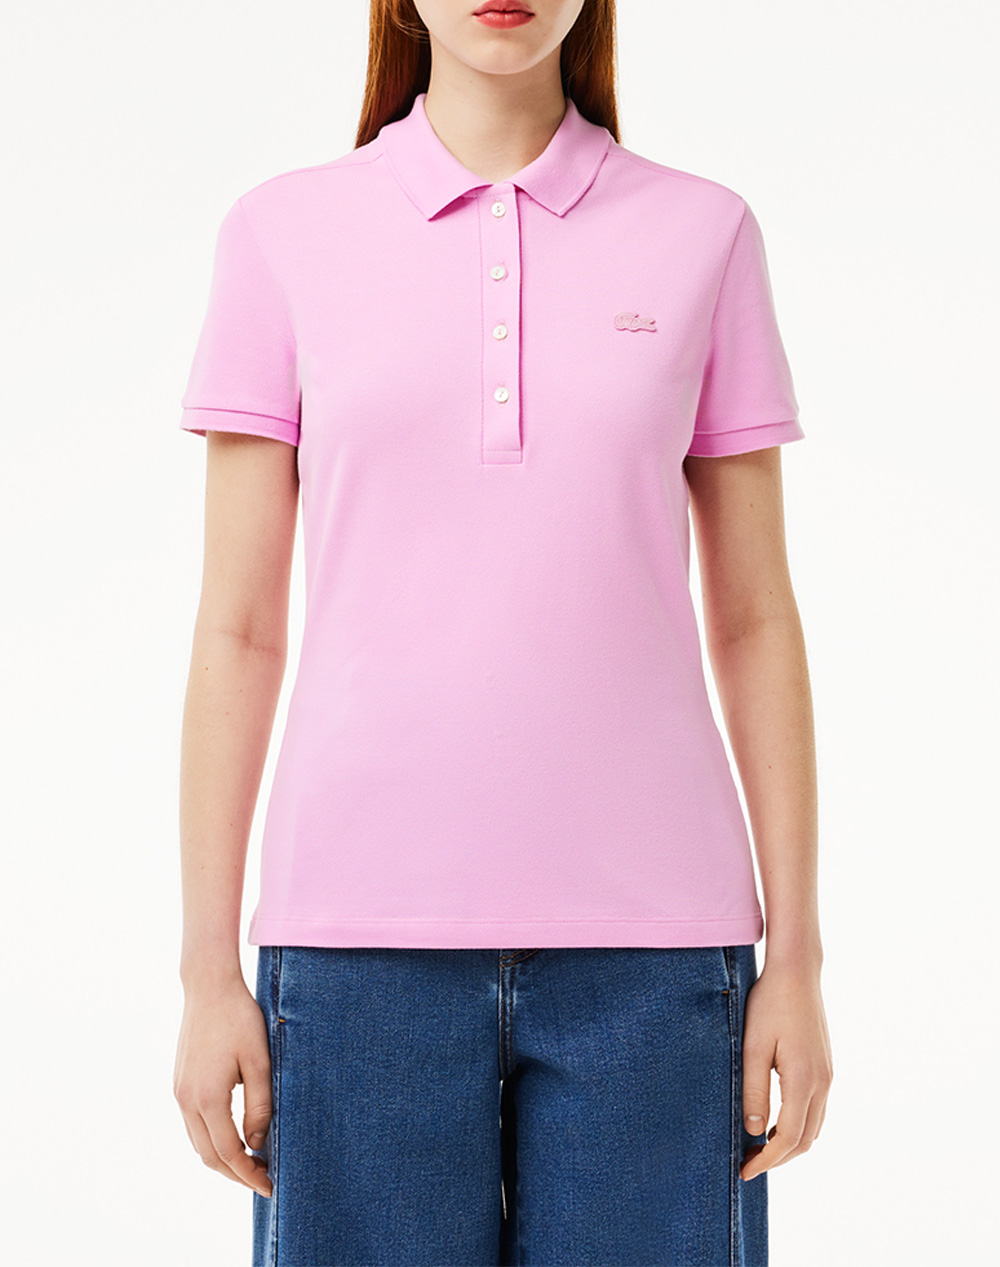 LACOSTE ΜΠΛΟΥΖΑ ΚΜ POLO SS 3PF5462-IXV Pink 3810ALACO3410040_XR28107